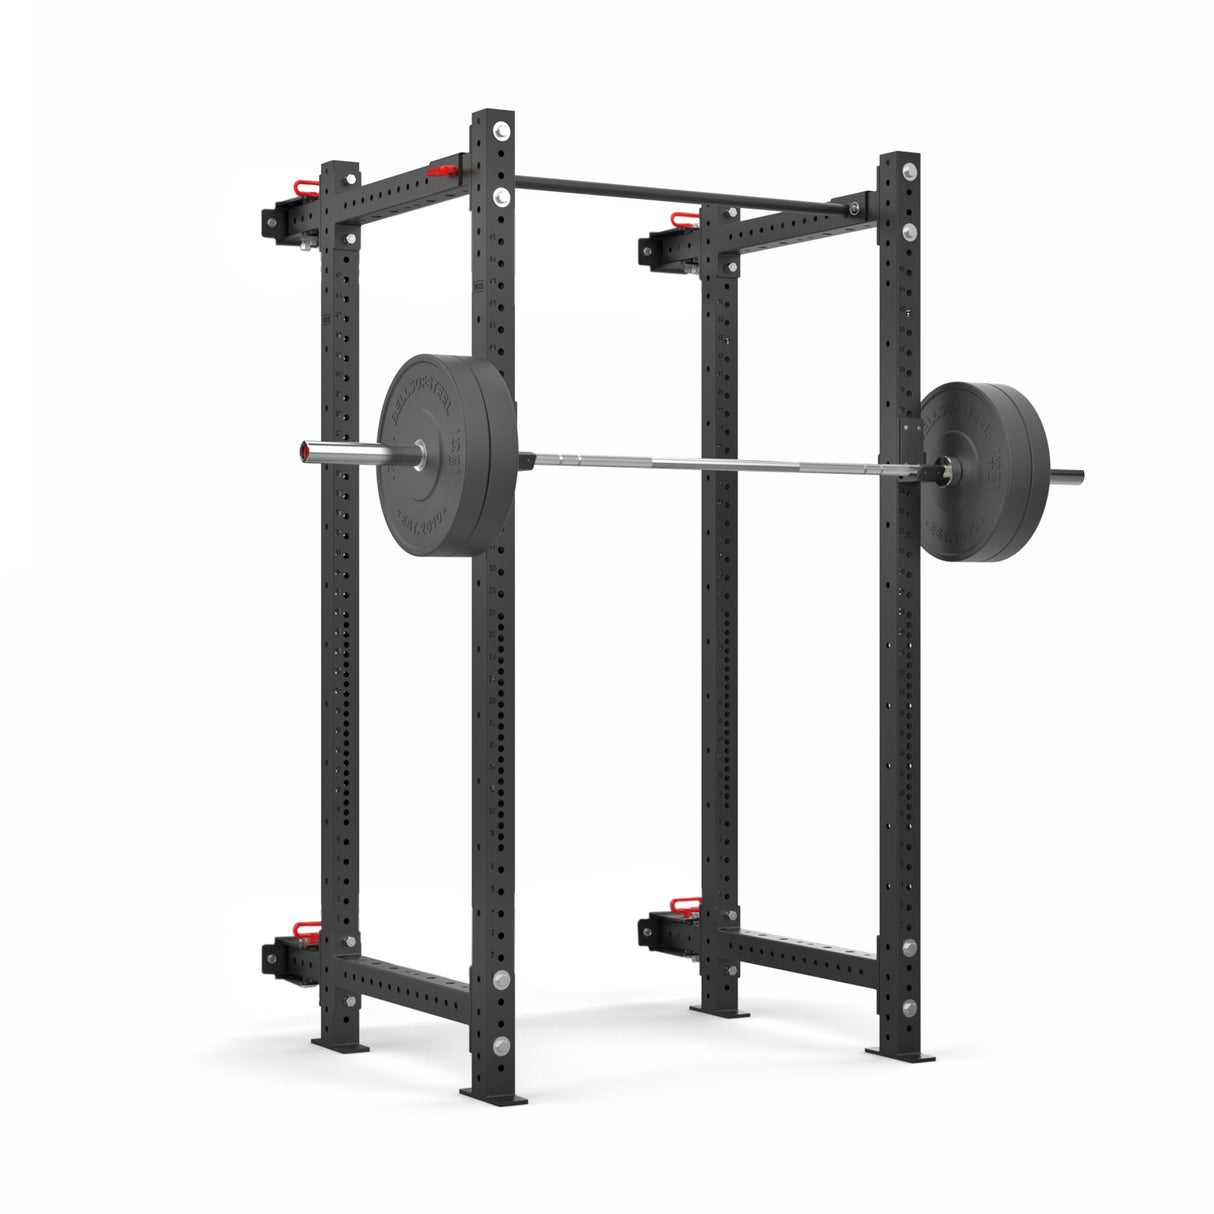 Product picture of the Hydra Folding Power Rack PREBUILT assembled with a loaded barbell